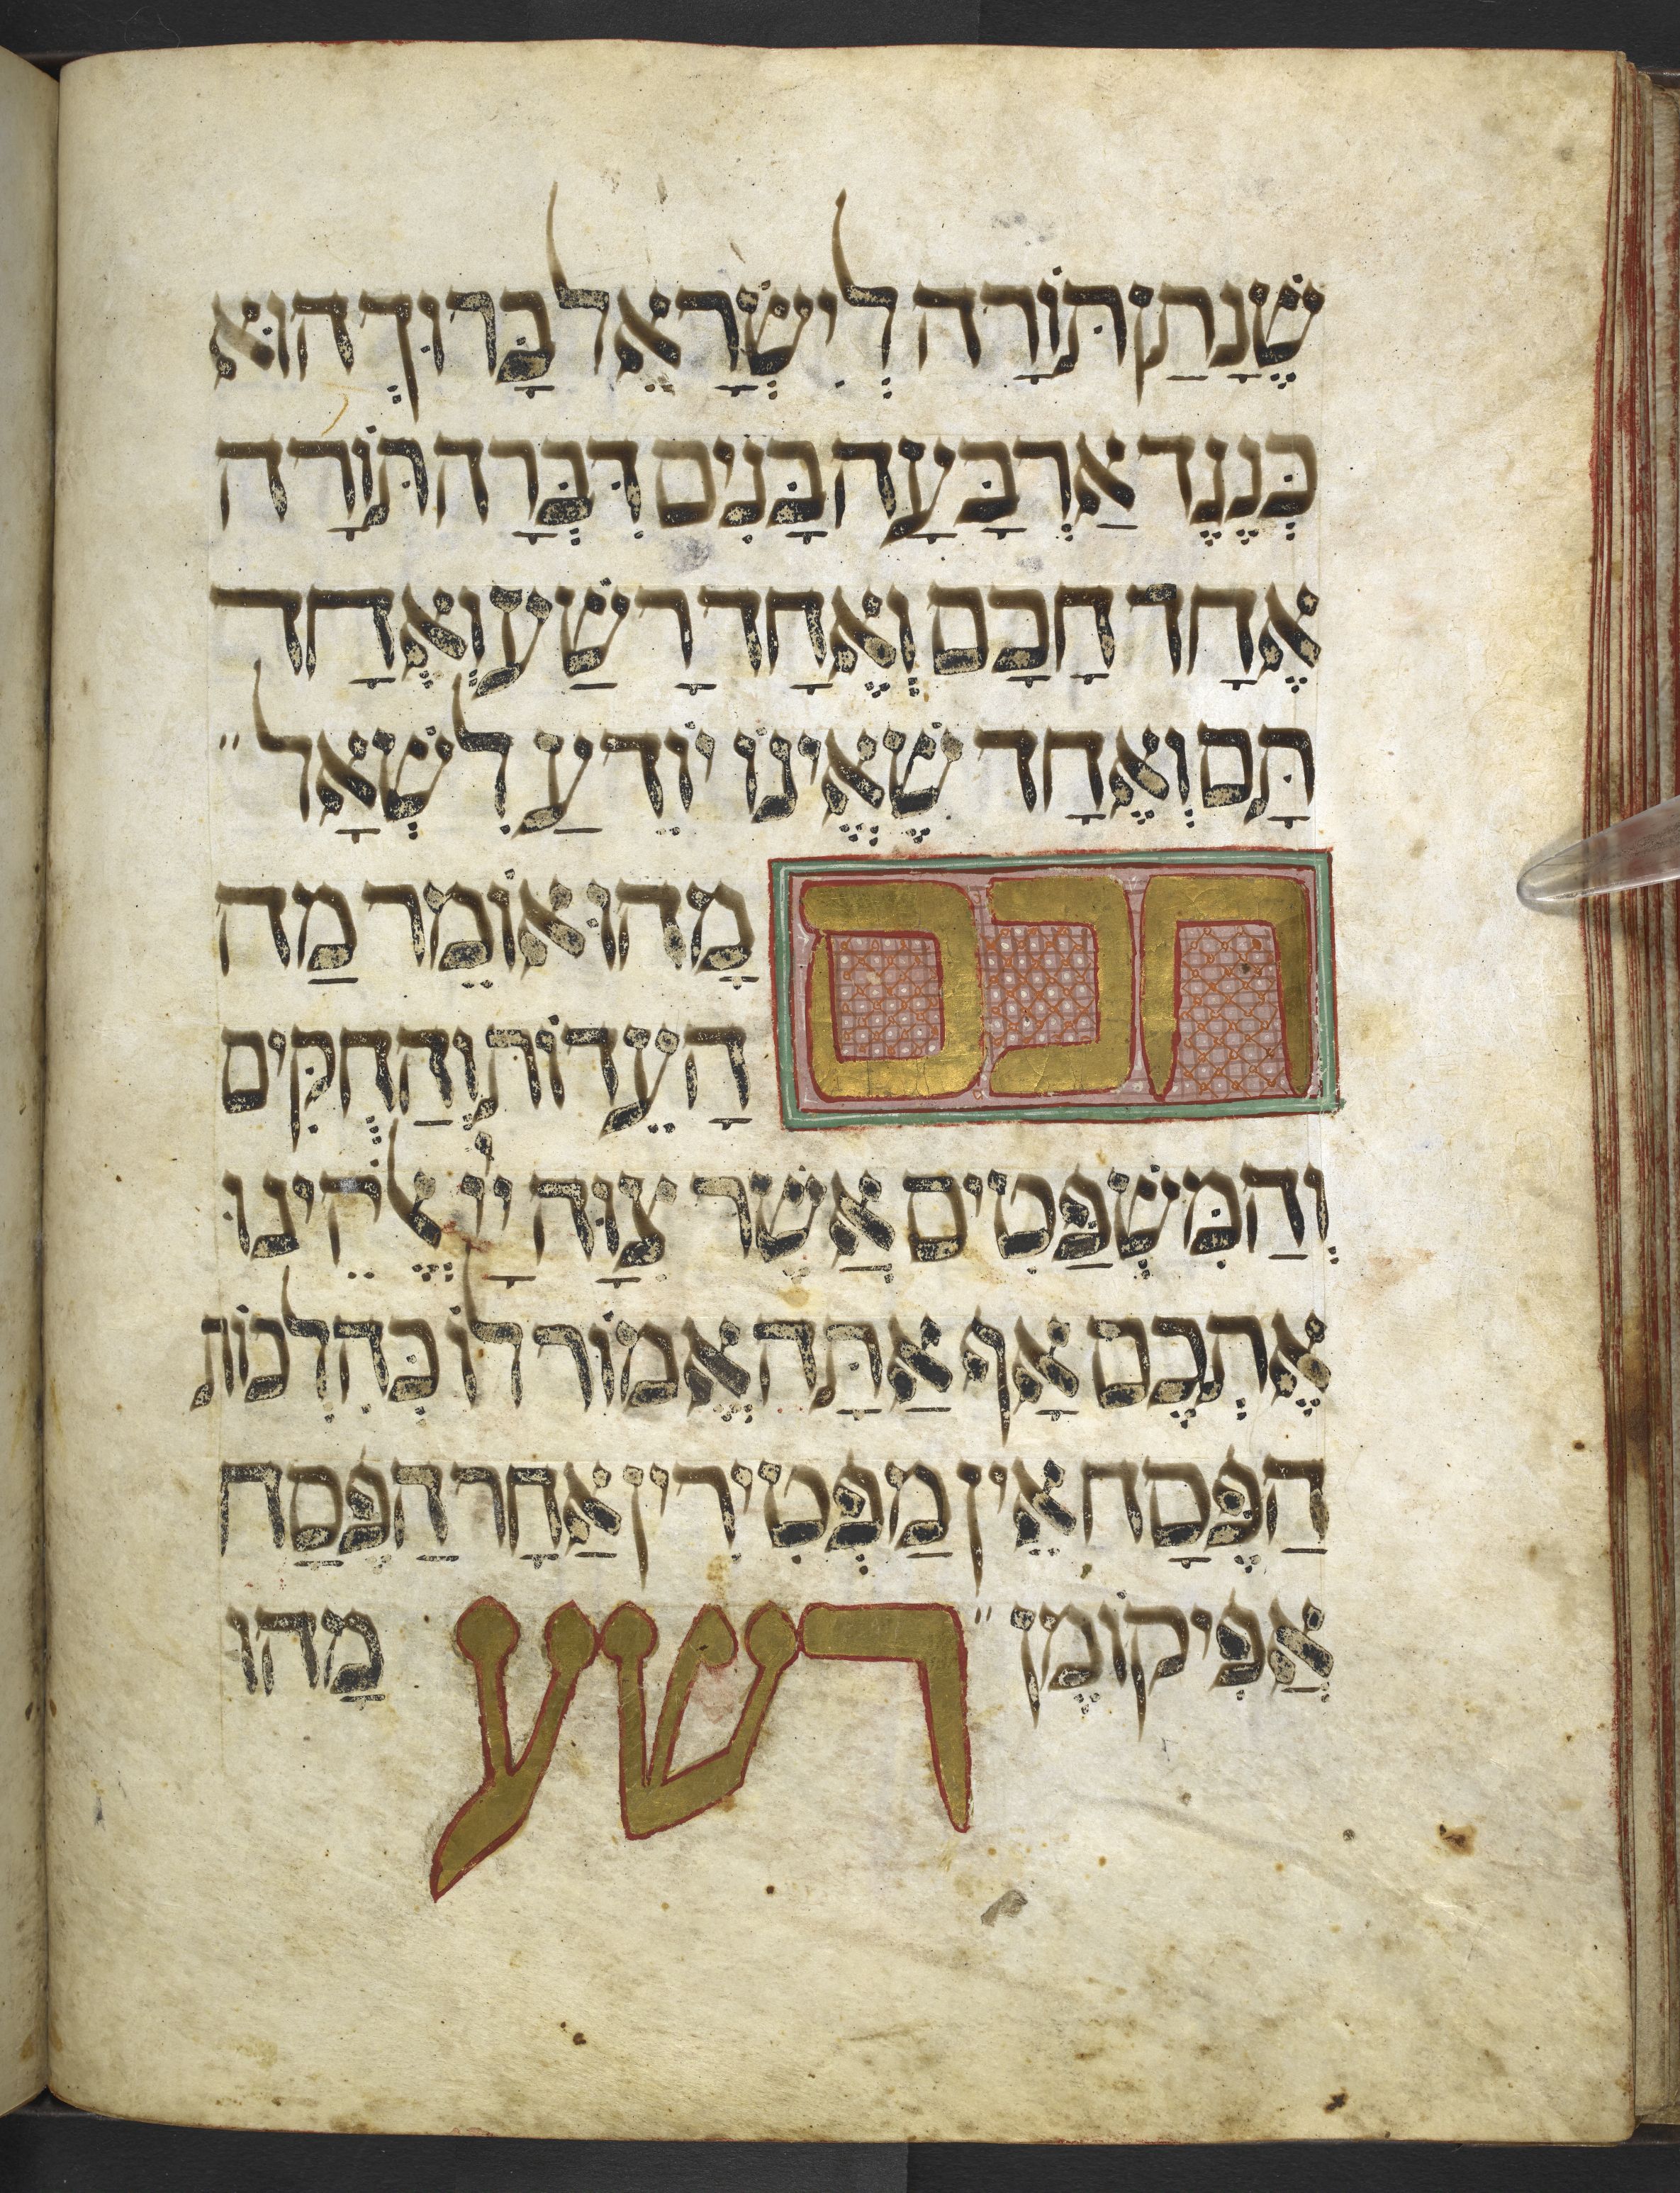 The Four Sons (Wise Son), The Golden Haggadah, 14th Century, Italy, NLI